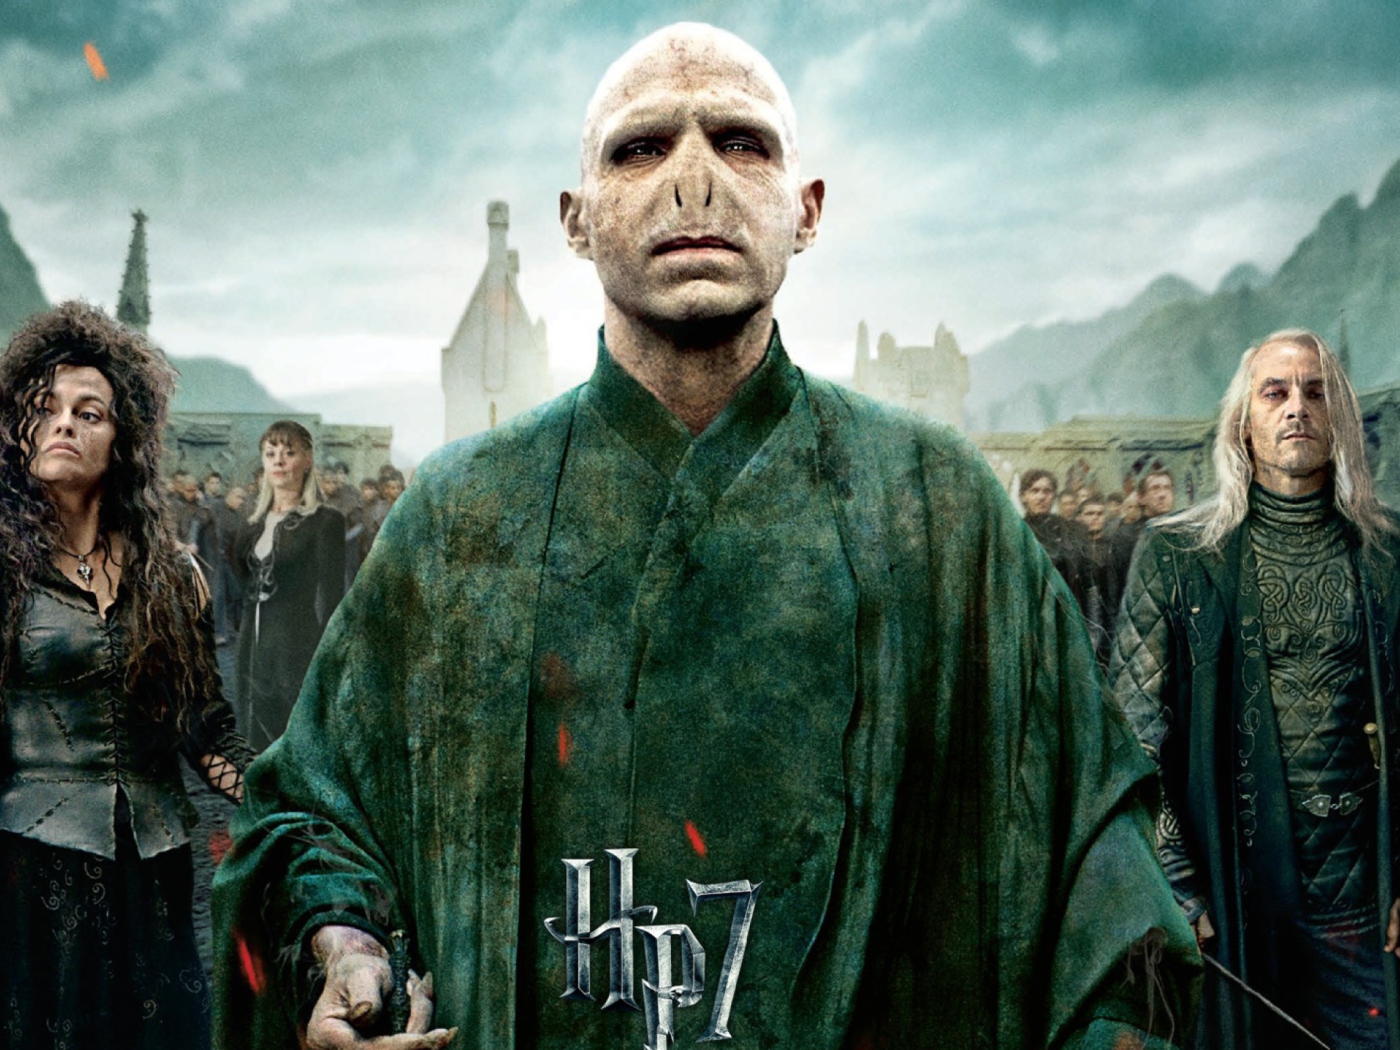 Harry Potter And The Deathly Hallows Part 2 wallpaper 1400x1050